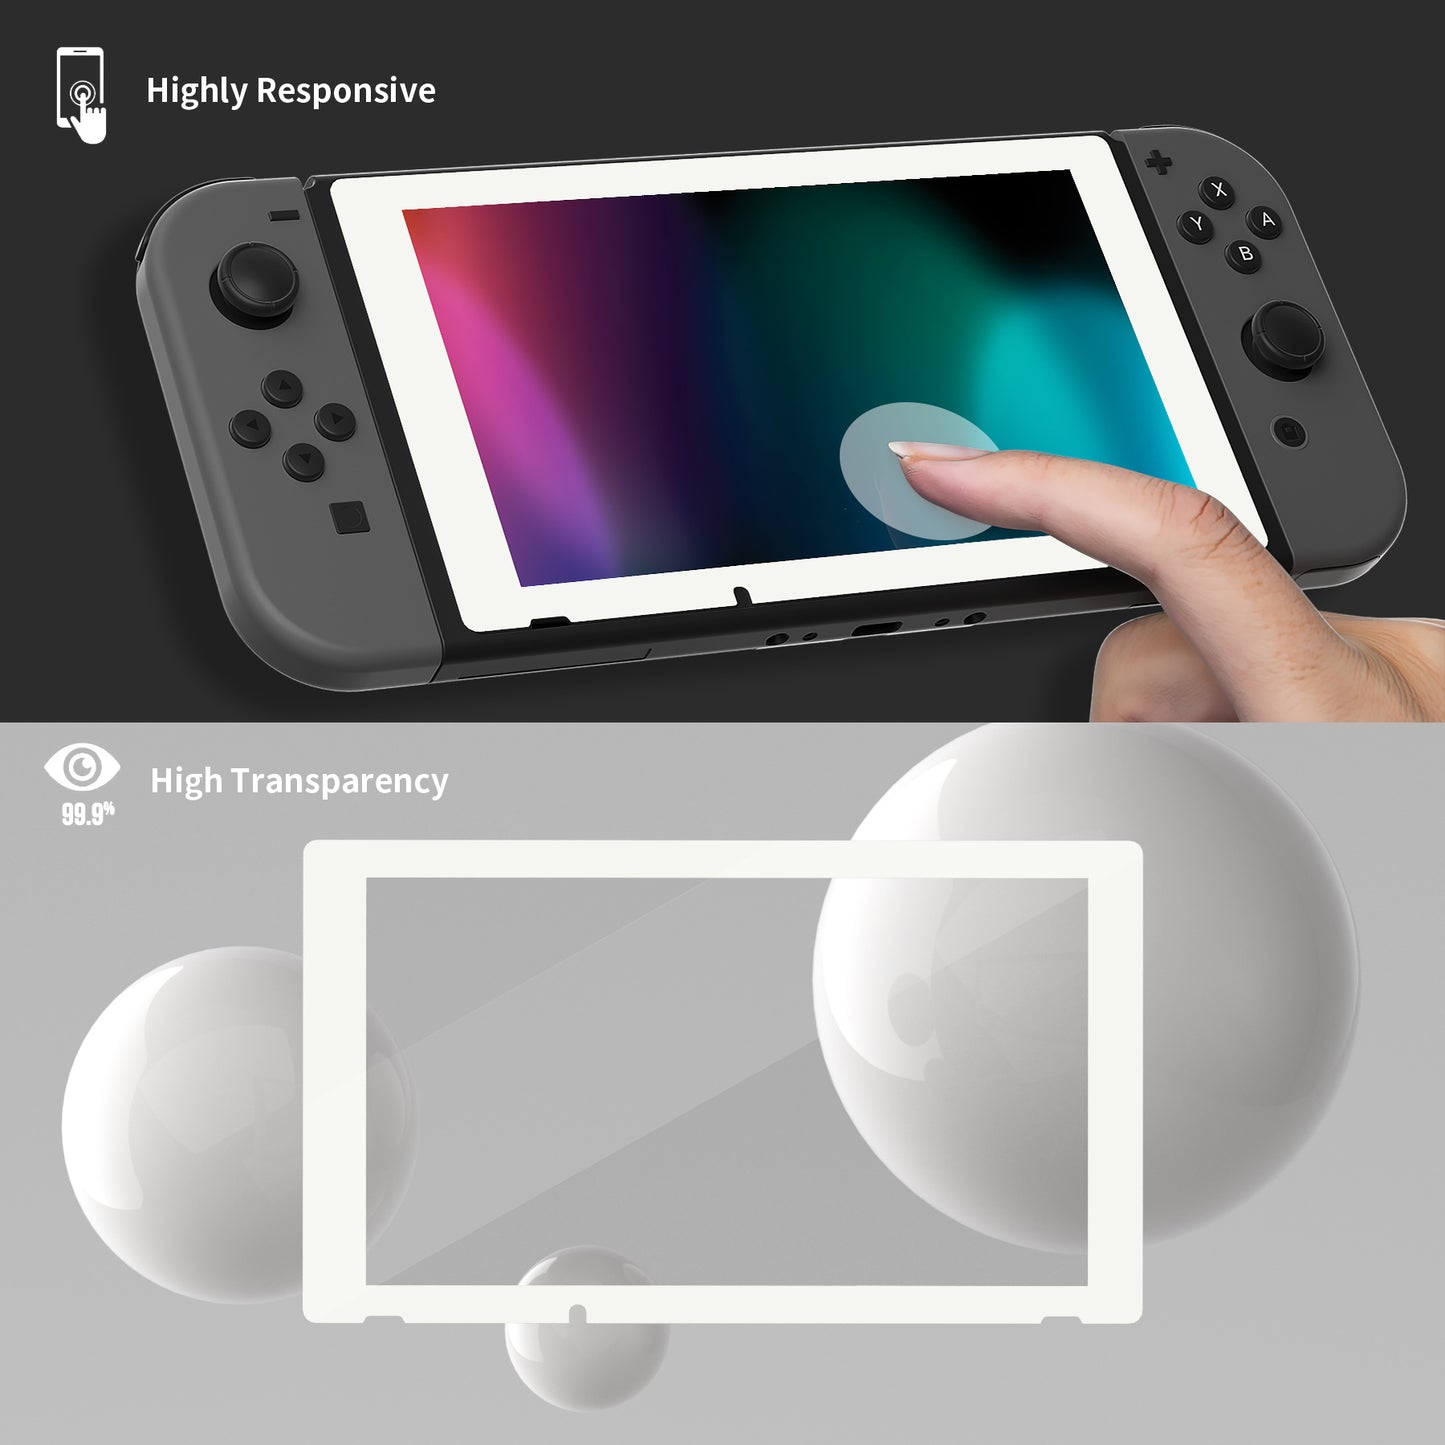 2 Pack White Border Transparent HD Clear Saver Protector Film, Tempered Glass Screen Protector for Nintendo Switch [Anti-Scratch, Anti-Fingerprint, Shatterproof, Bubble-Free] - NSPJ0703 playvital